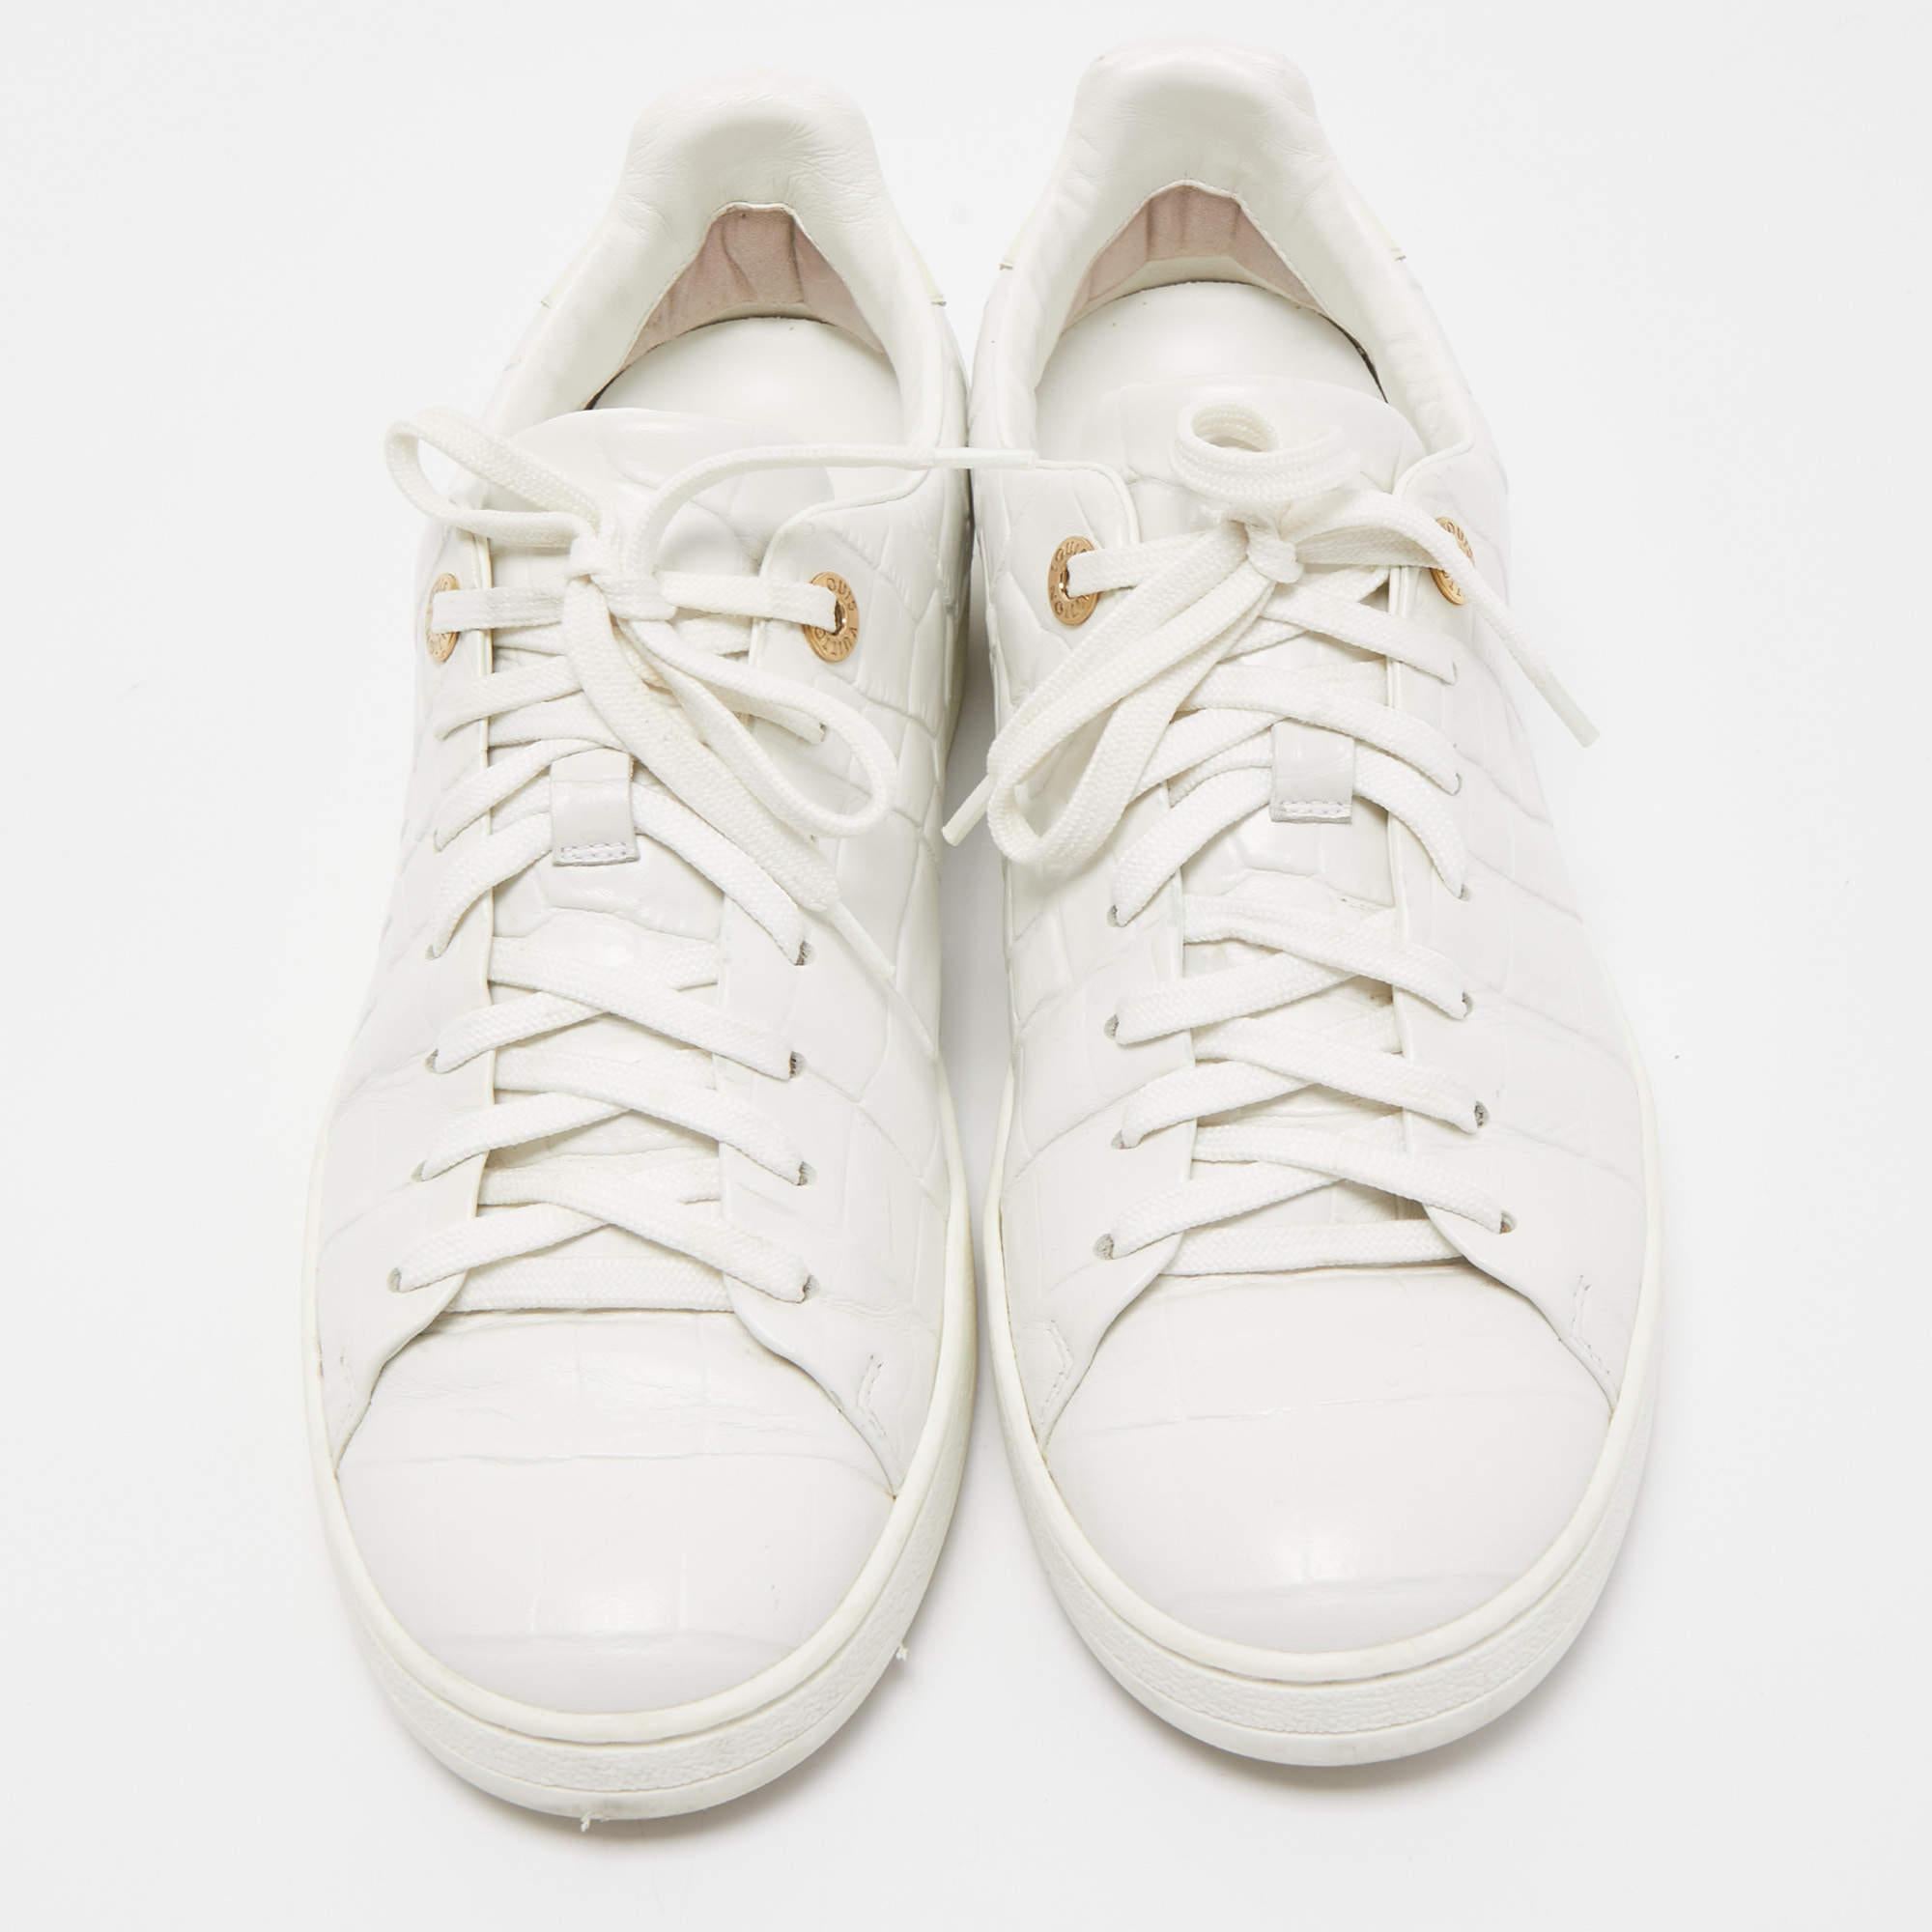 Give your outfit a luxe update with this pair of designer sneakers. The creation is sewn perfectly to help you make a statement in them for a long time.

Includes: Extra Lace
